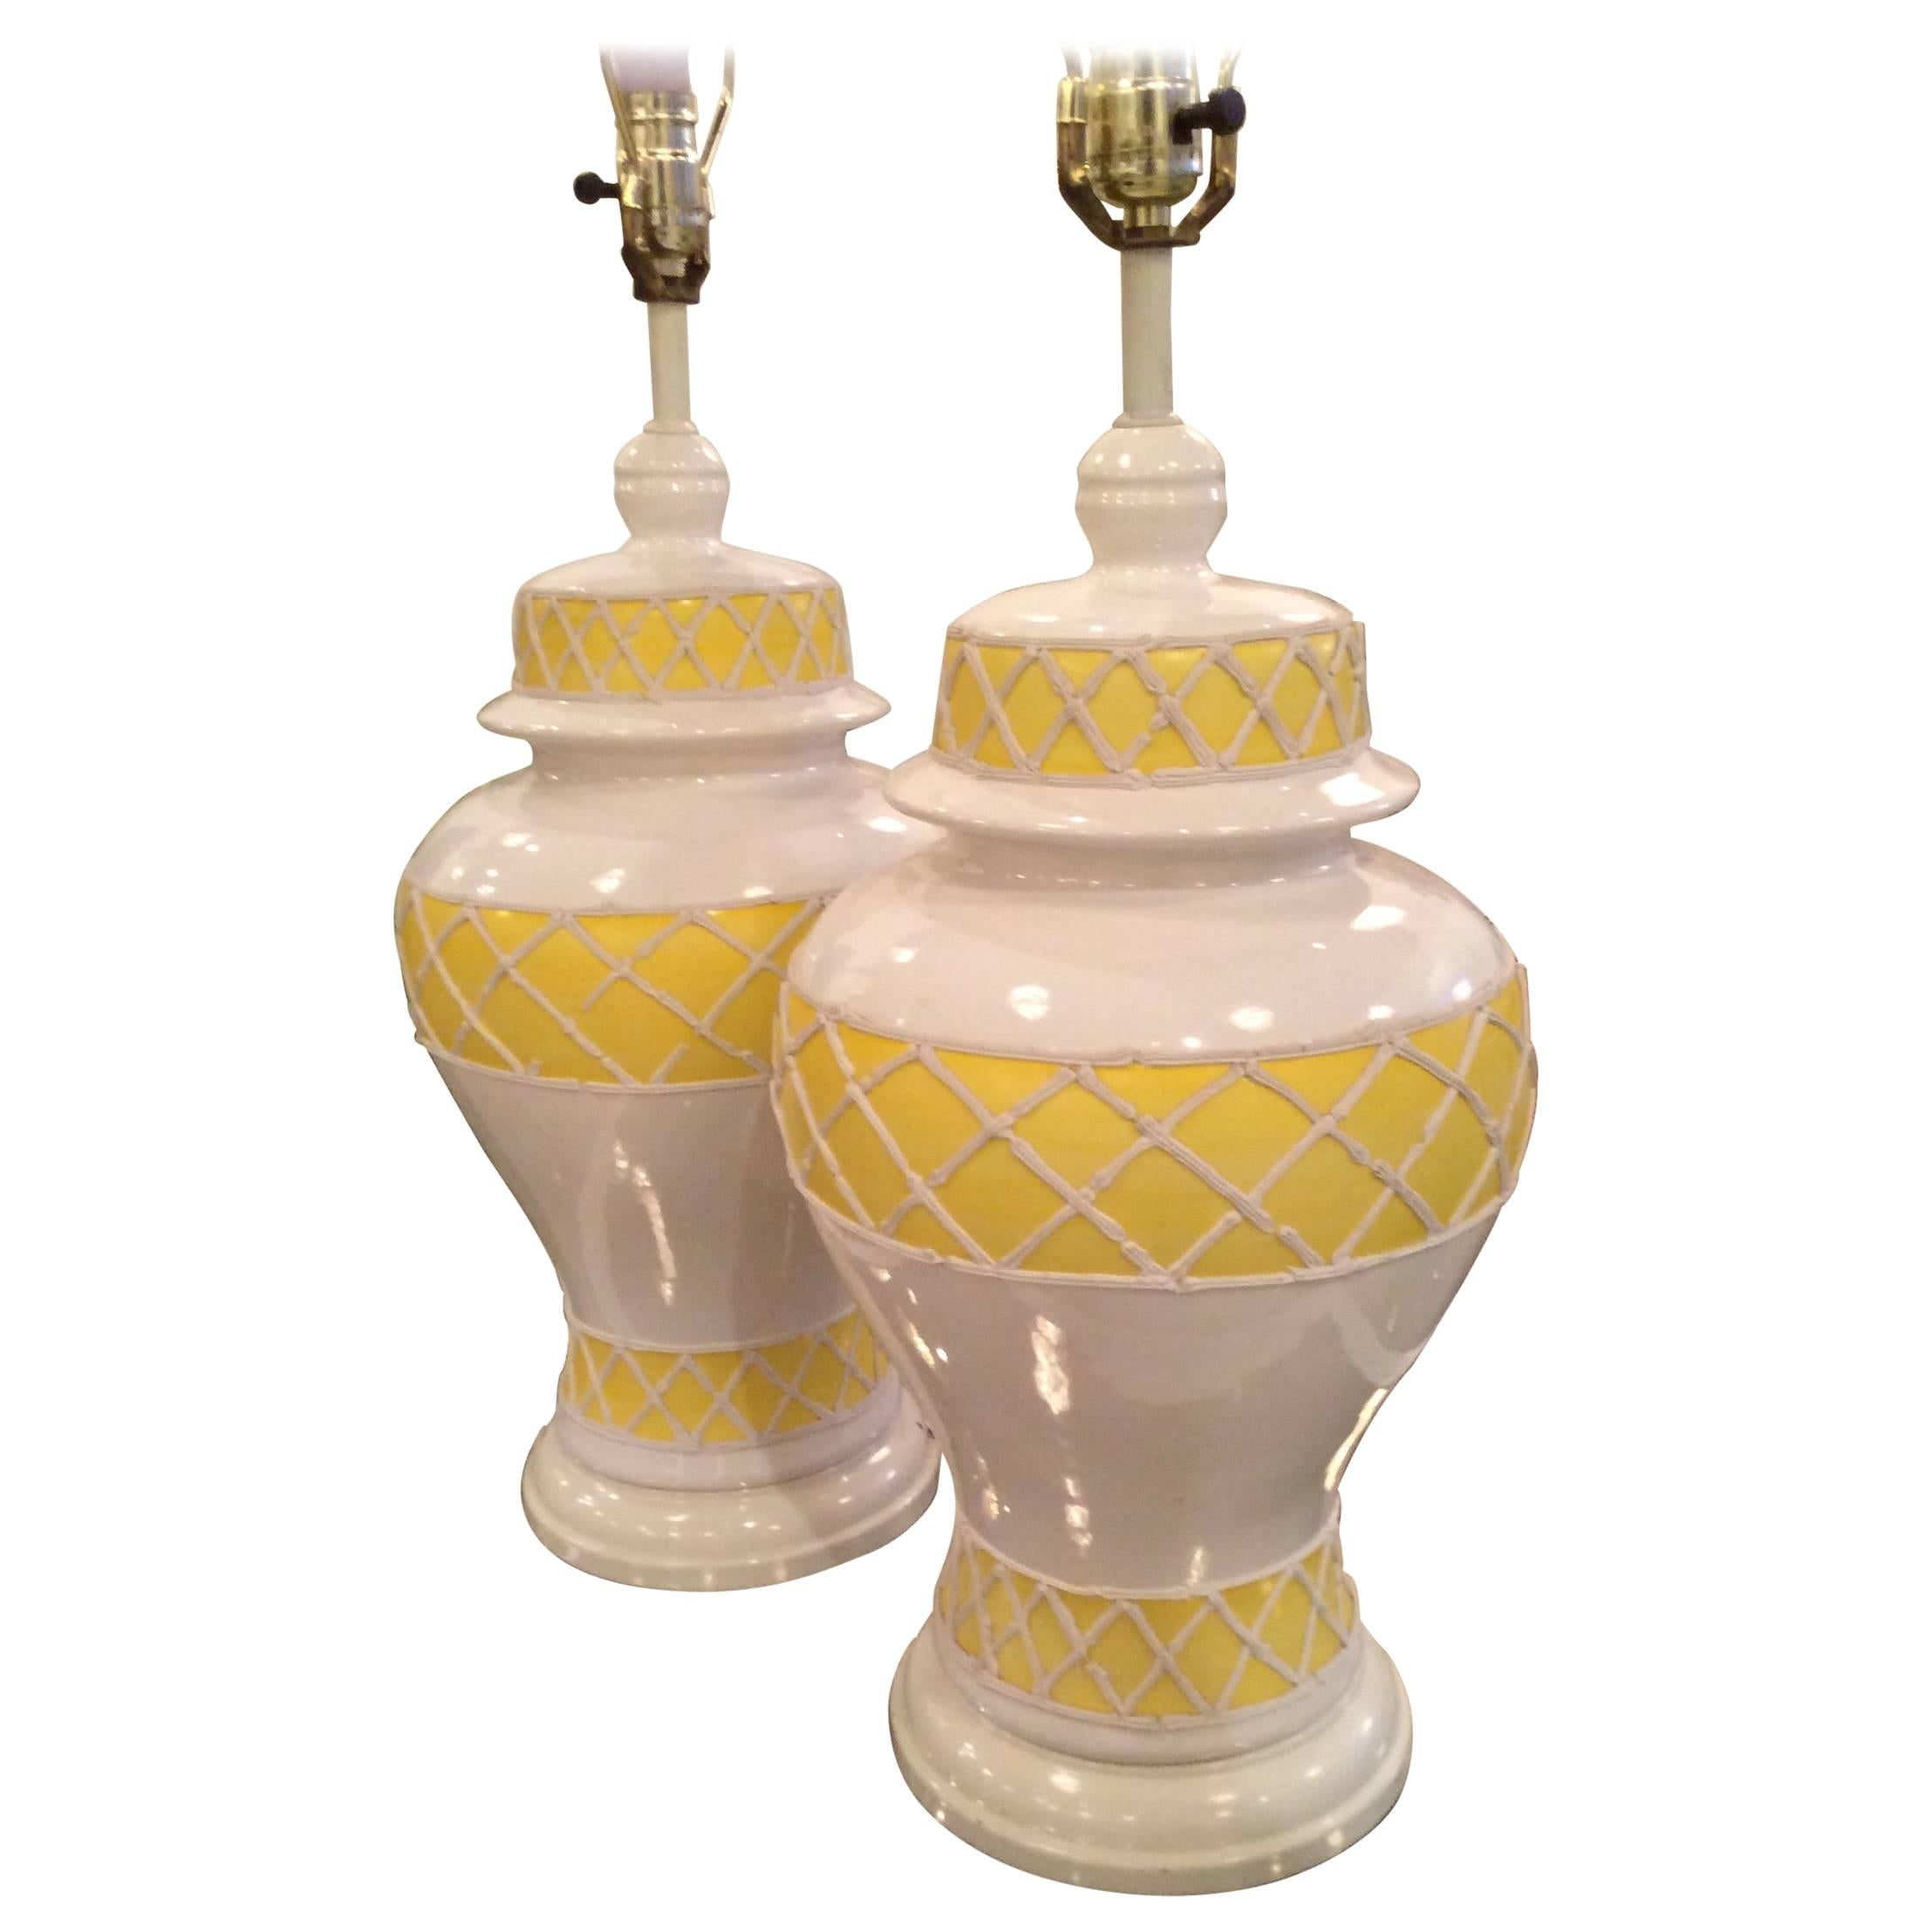 Large Vintage Ginger Jar Icing Table Lamps Pair in Ceramic Yellow, Palm Beach